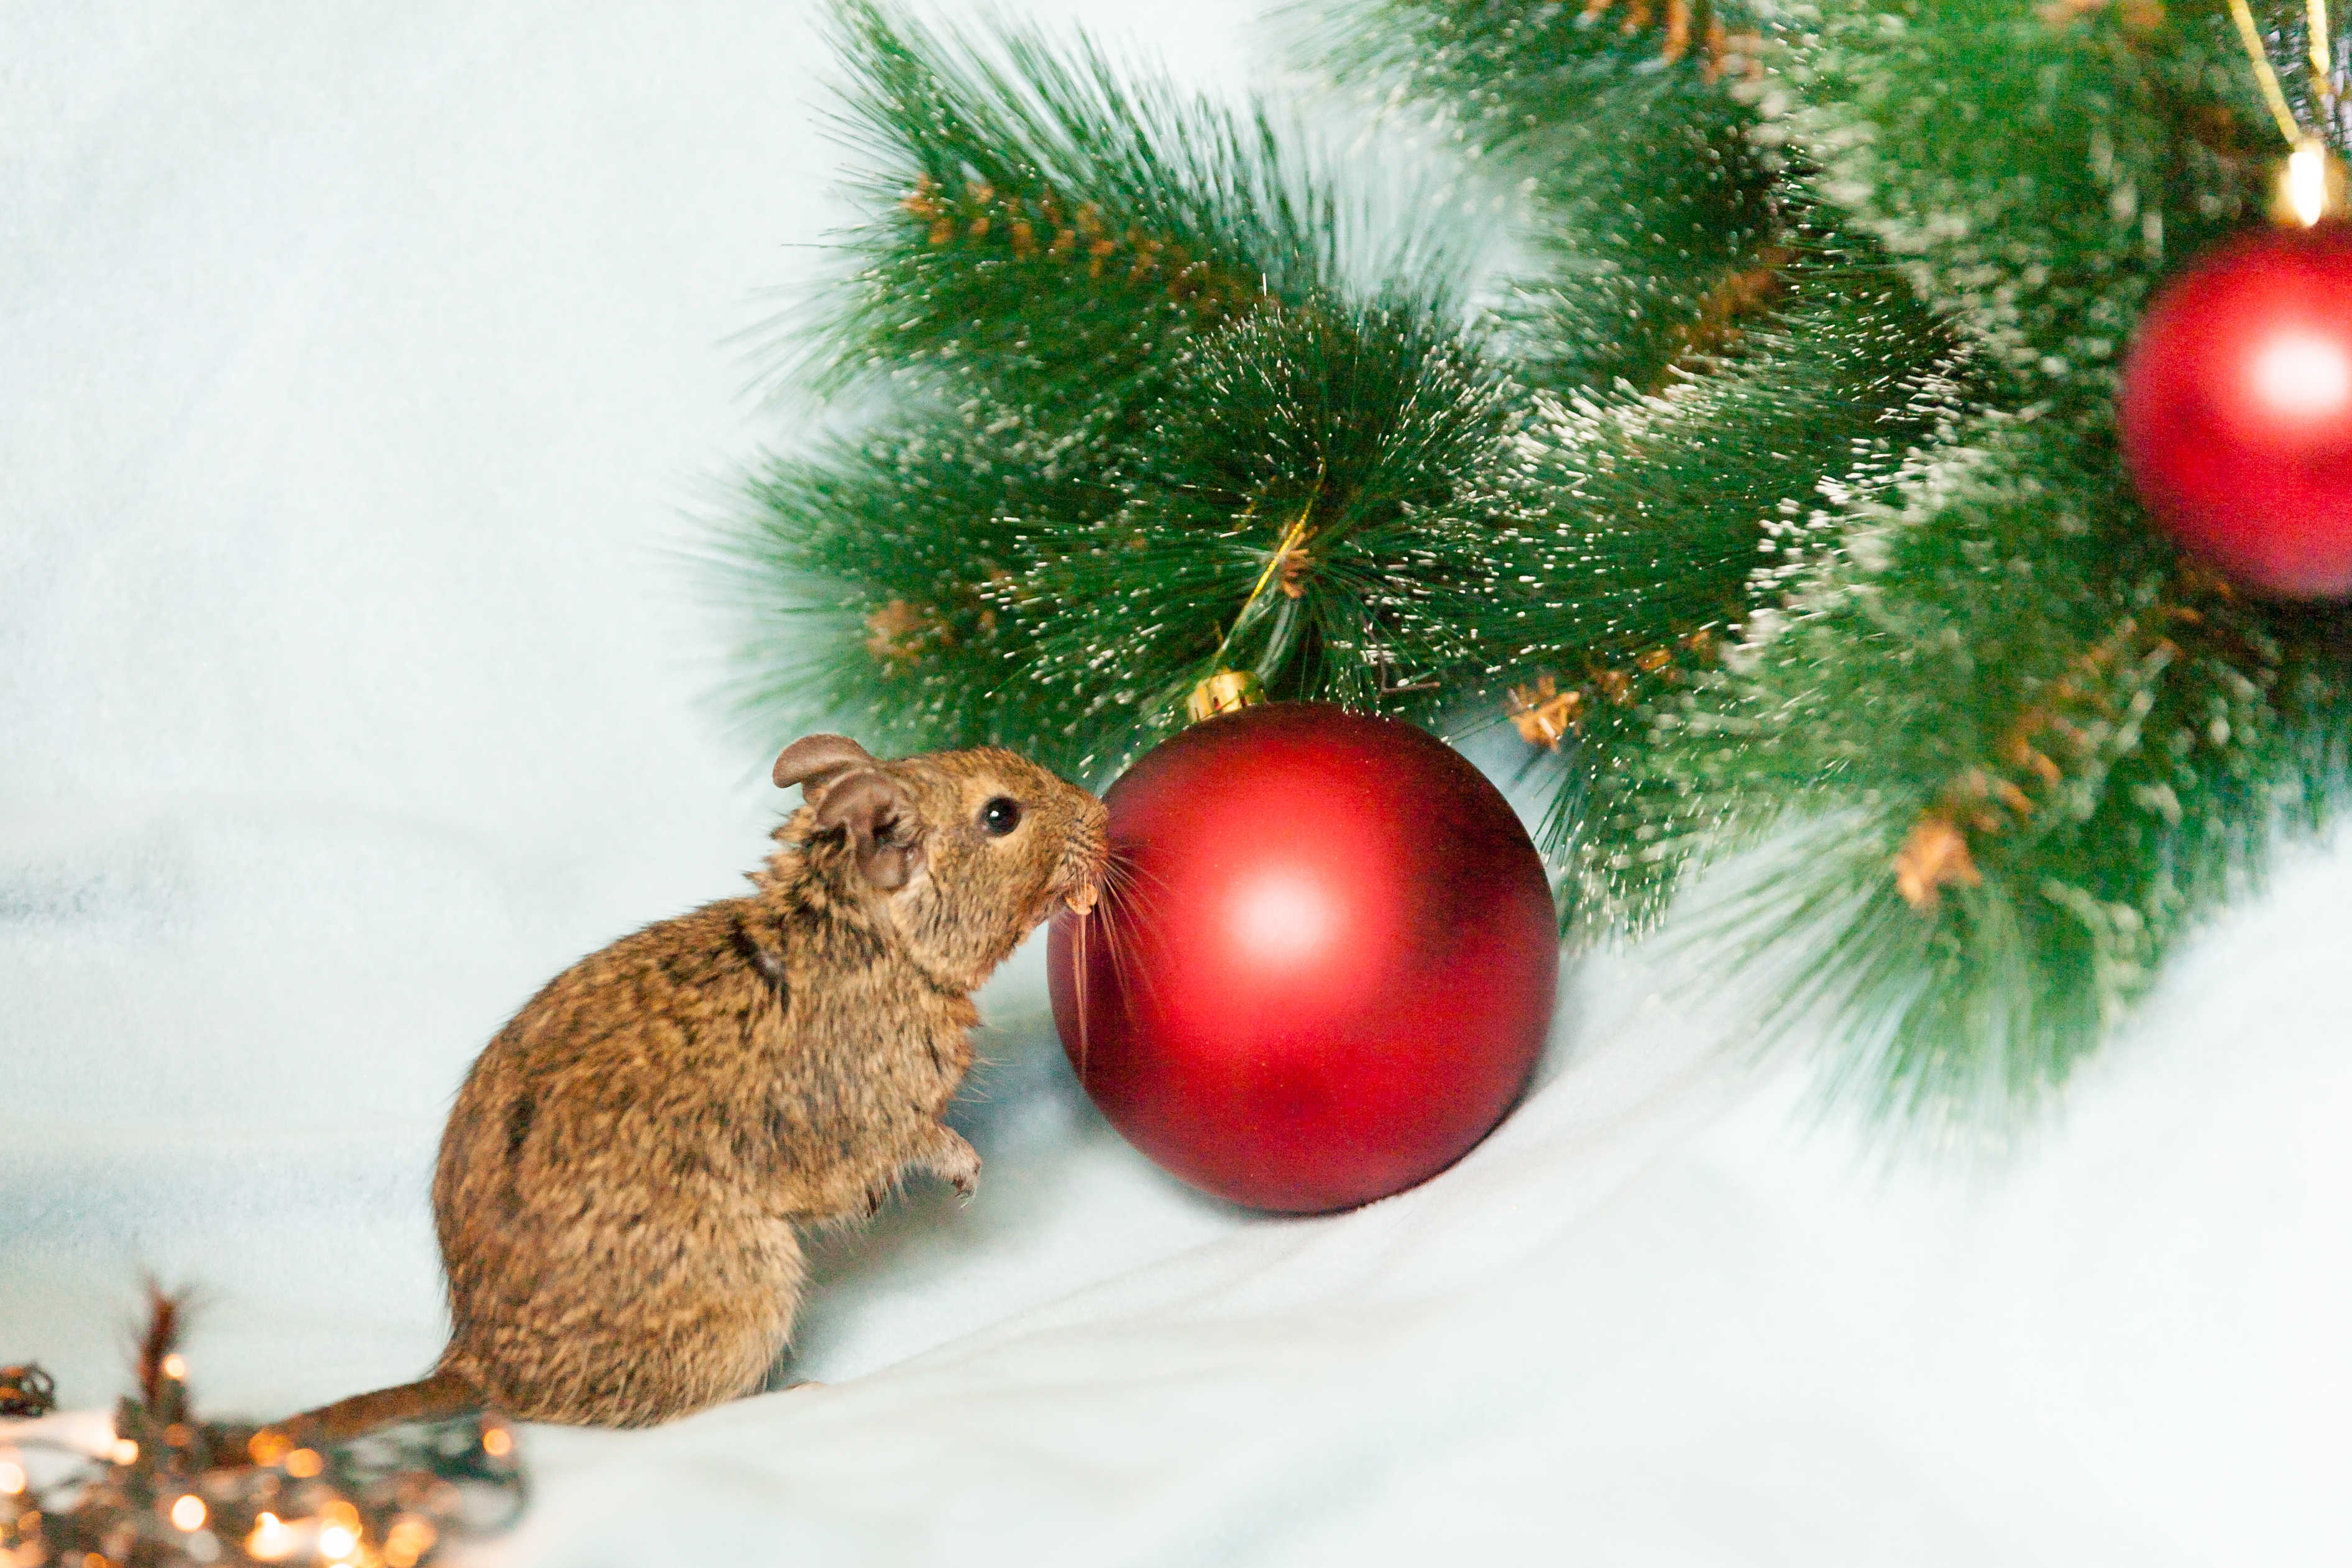 rodent sniffing Christmas ornament